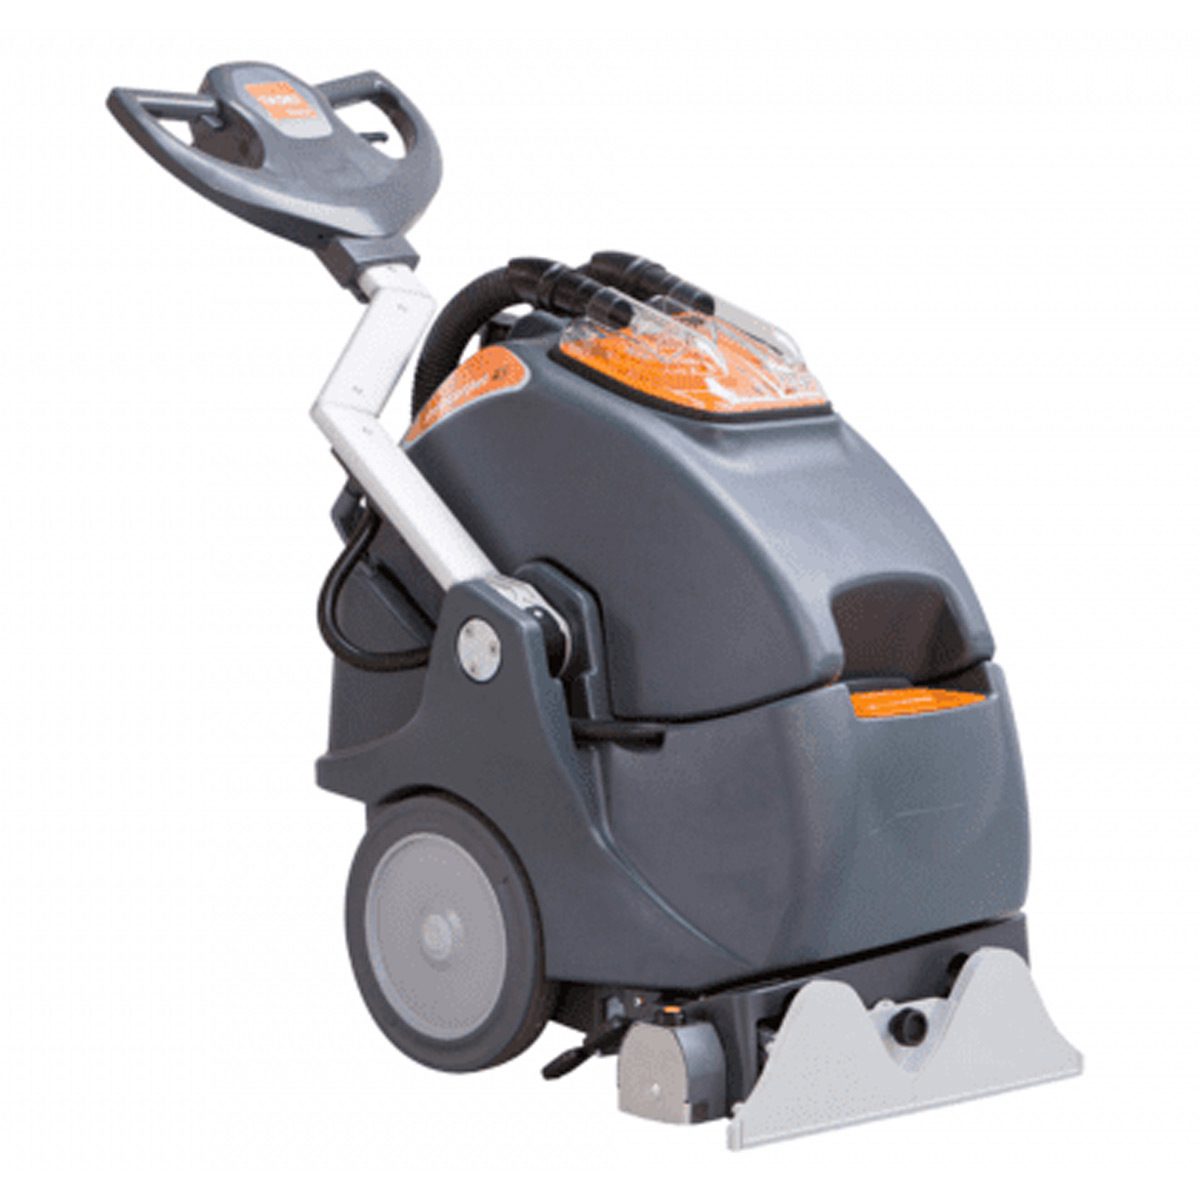 machinery-matting-floor-scrubbers-taski-swingo-xp-r-floor-scrubber-dryer-deep-cleaning-extraction-for-heavy-soils-or-restorative-type-cleaning-application-vjs-distributors-D7523416ANZ.jpg